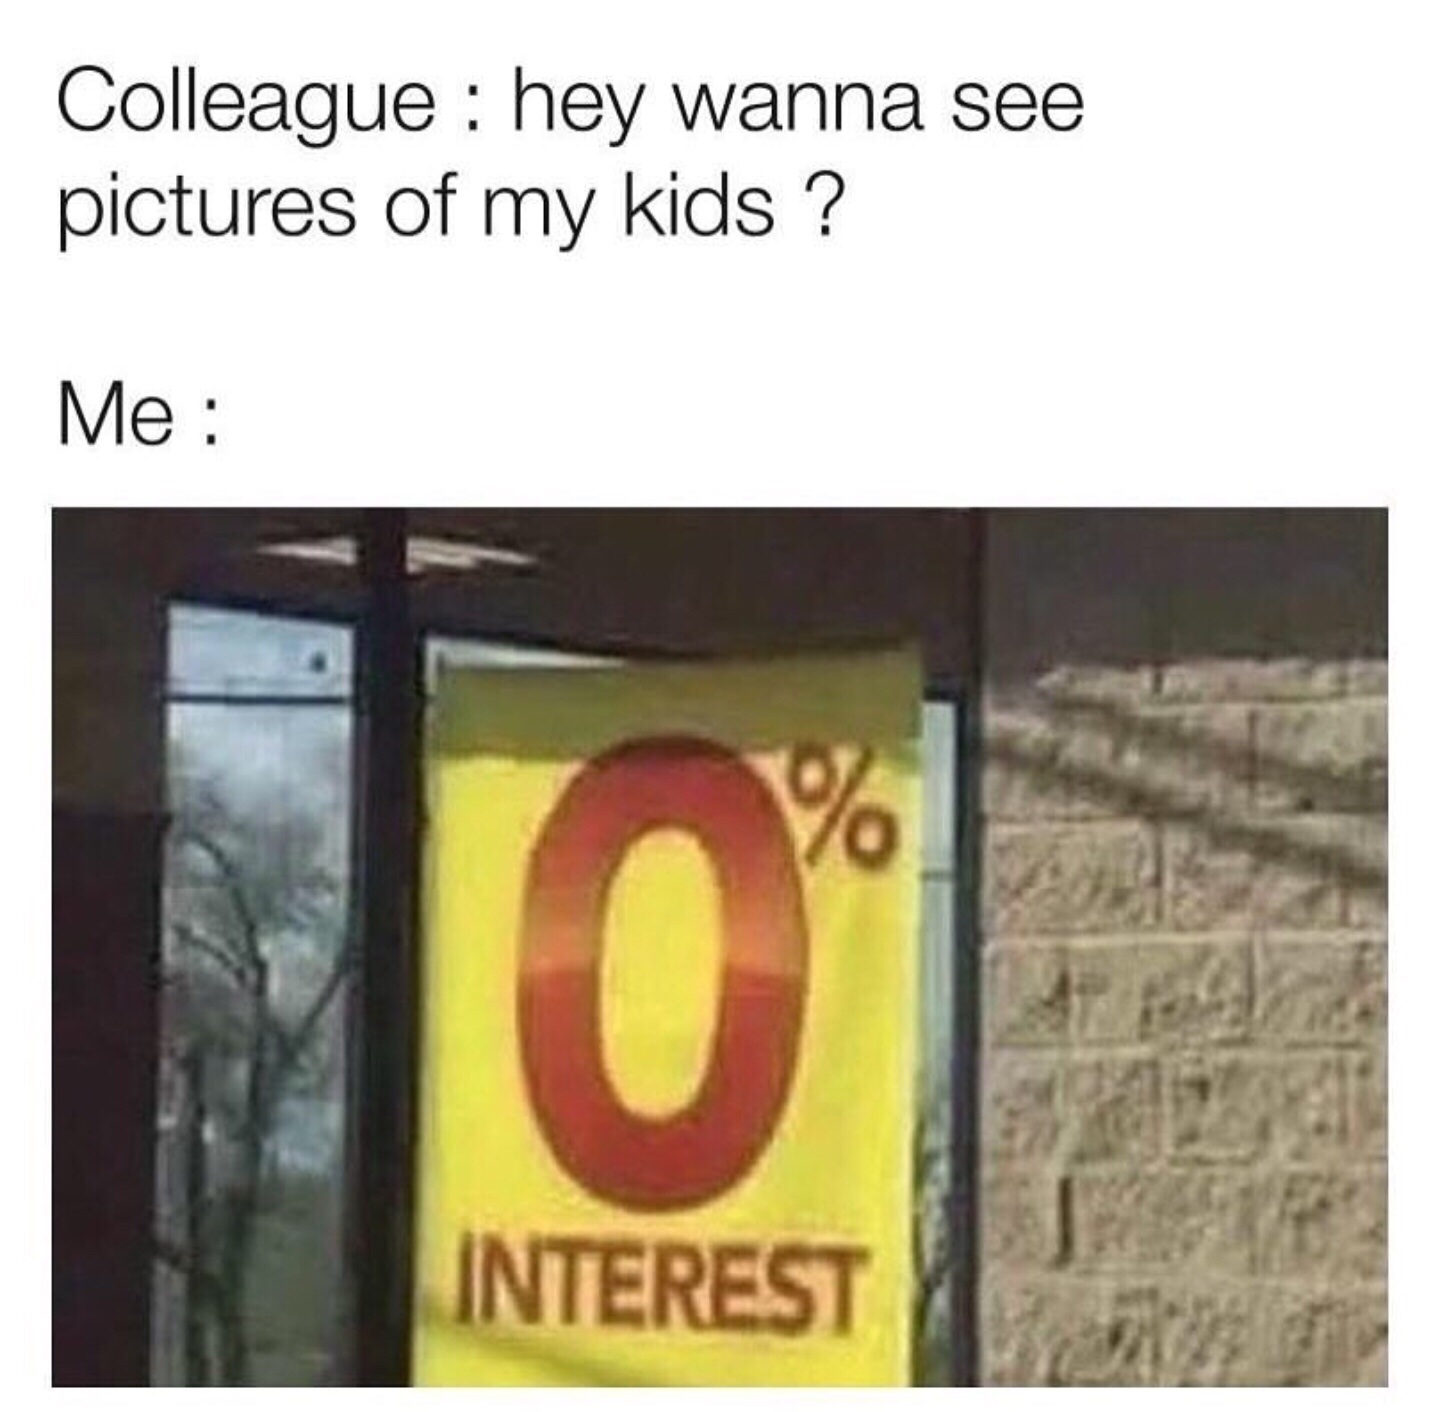 0% interest meme - Colleague hey wanna see pictures of my kids ? Me Interest